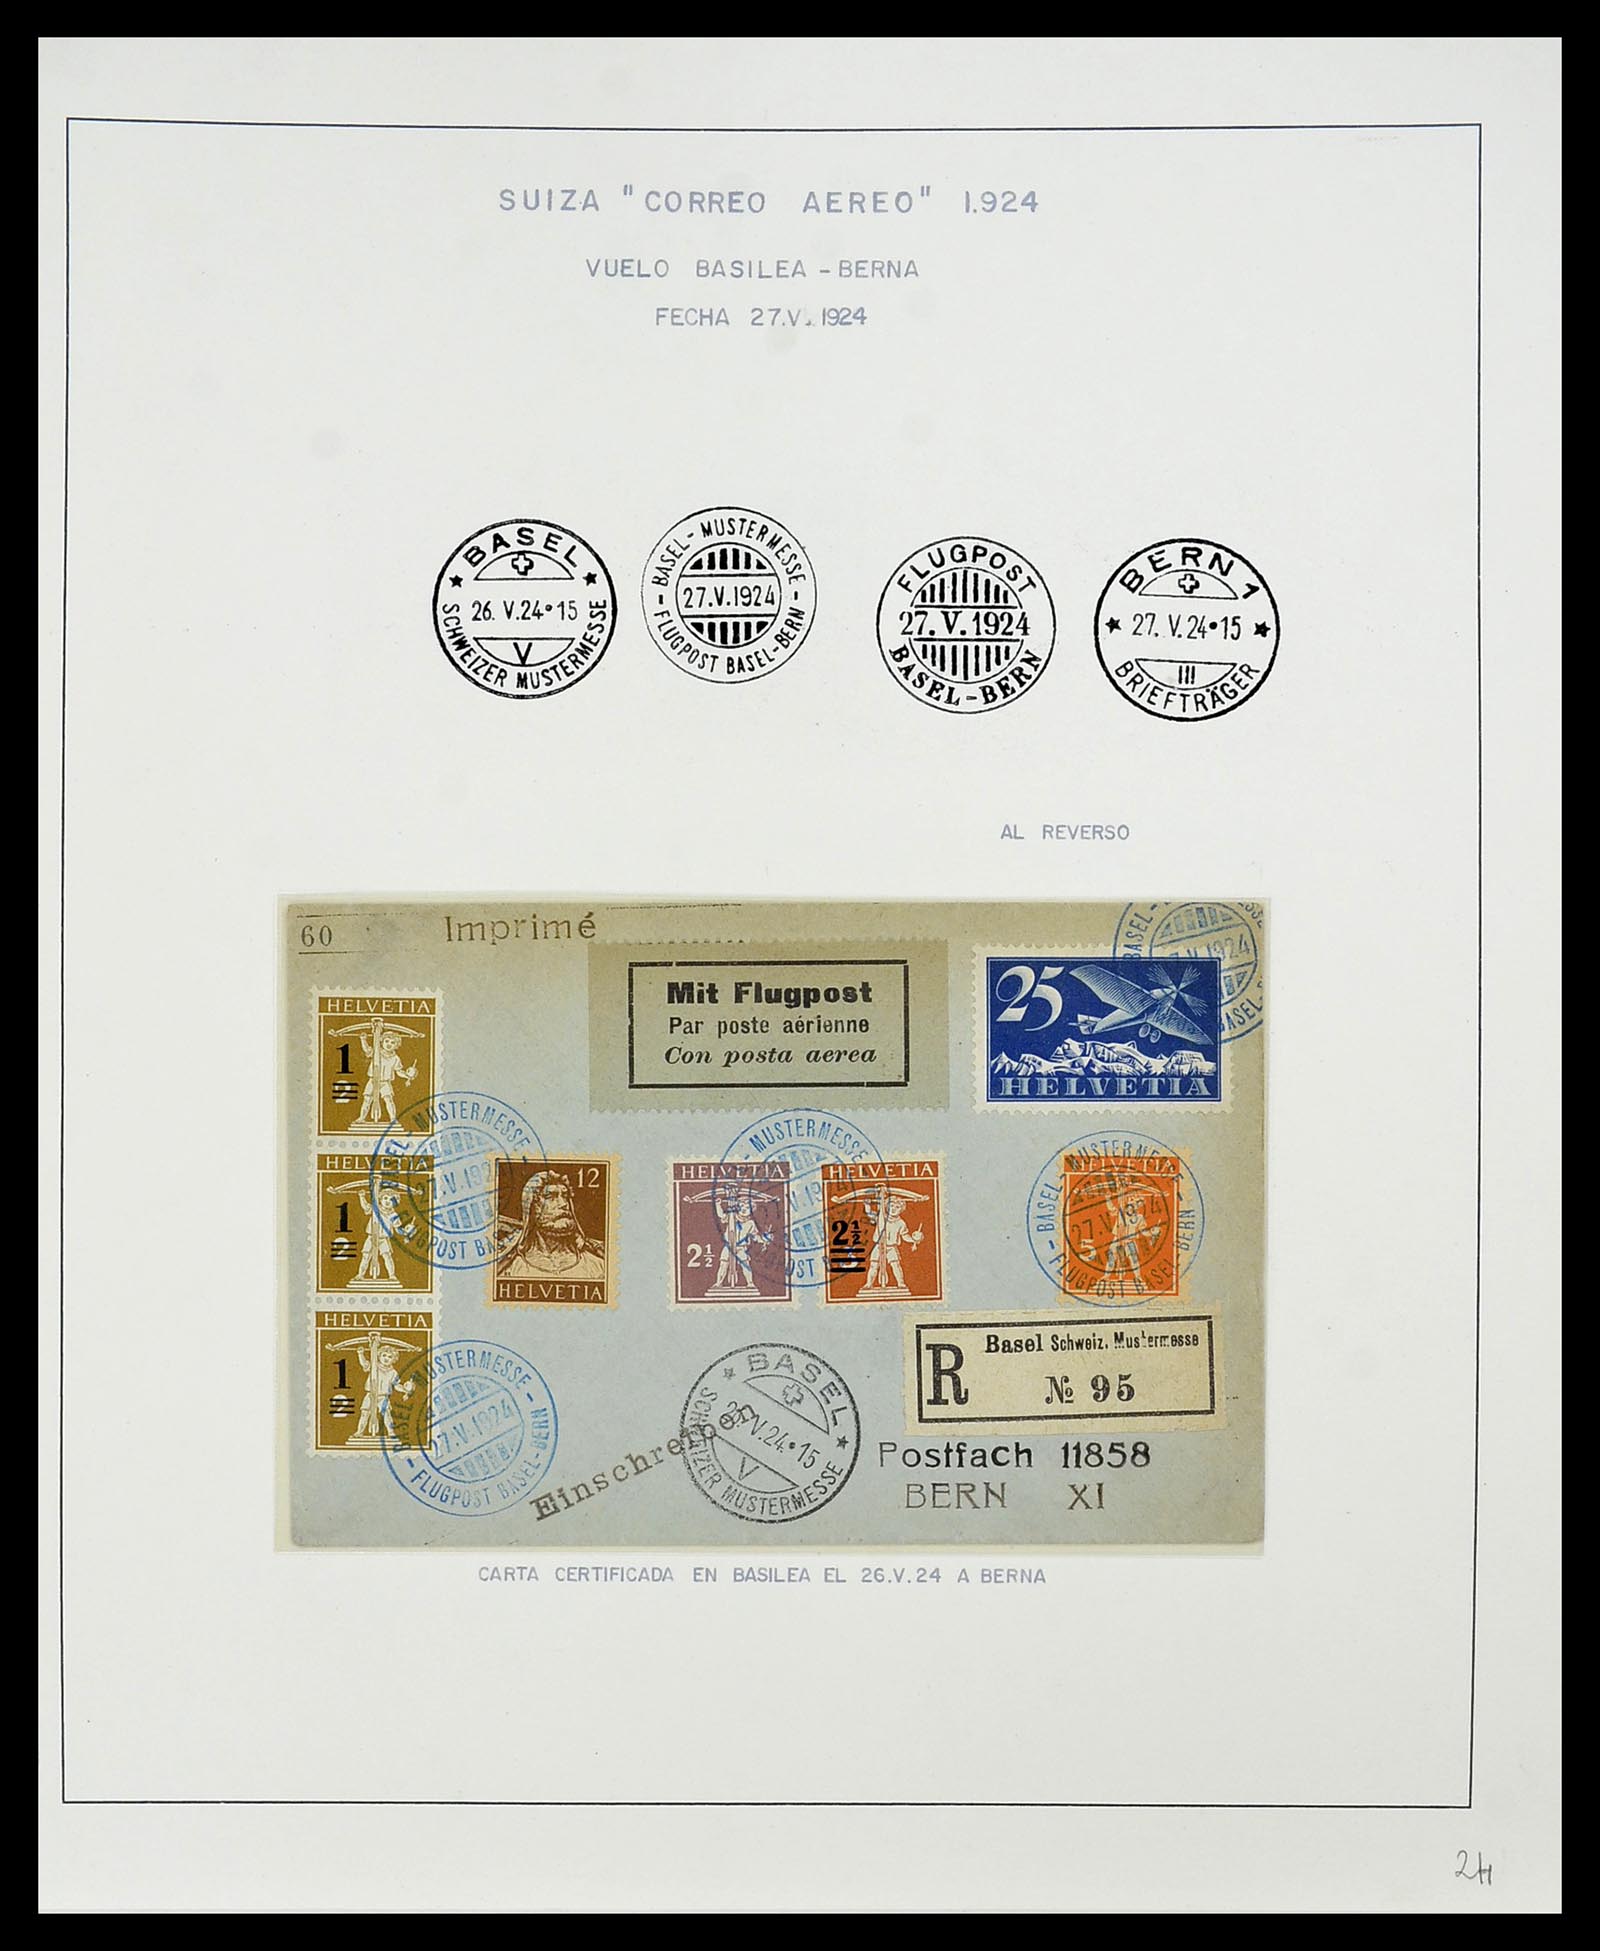 34137 092 - Stamp collection 34137 Switzerland airmail covers 1923-1963.